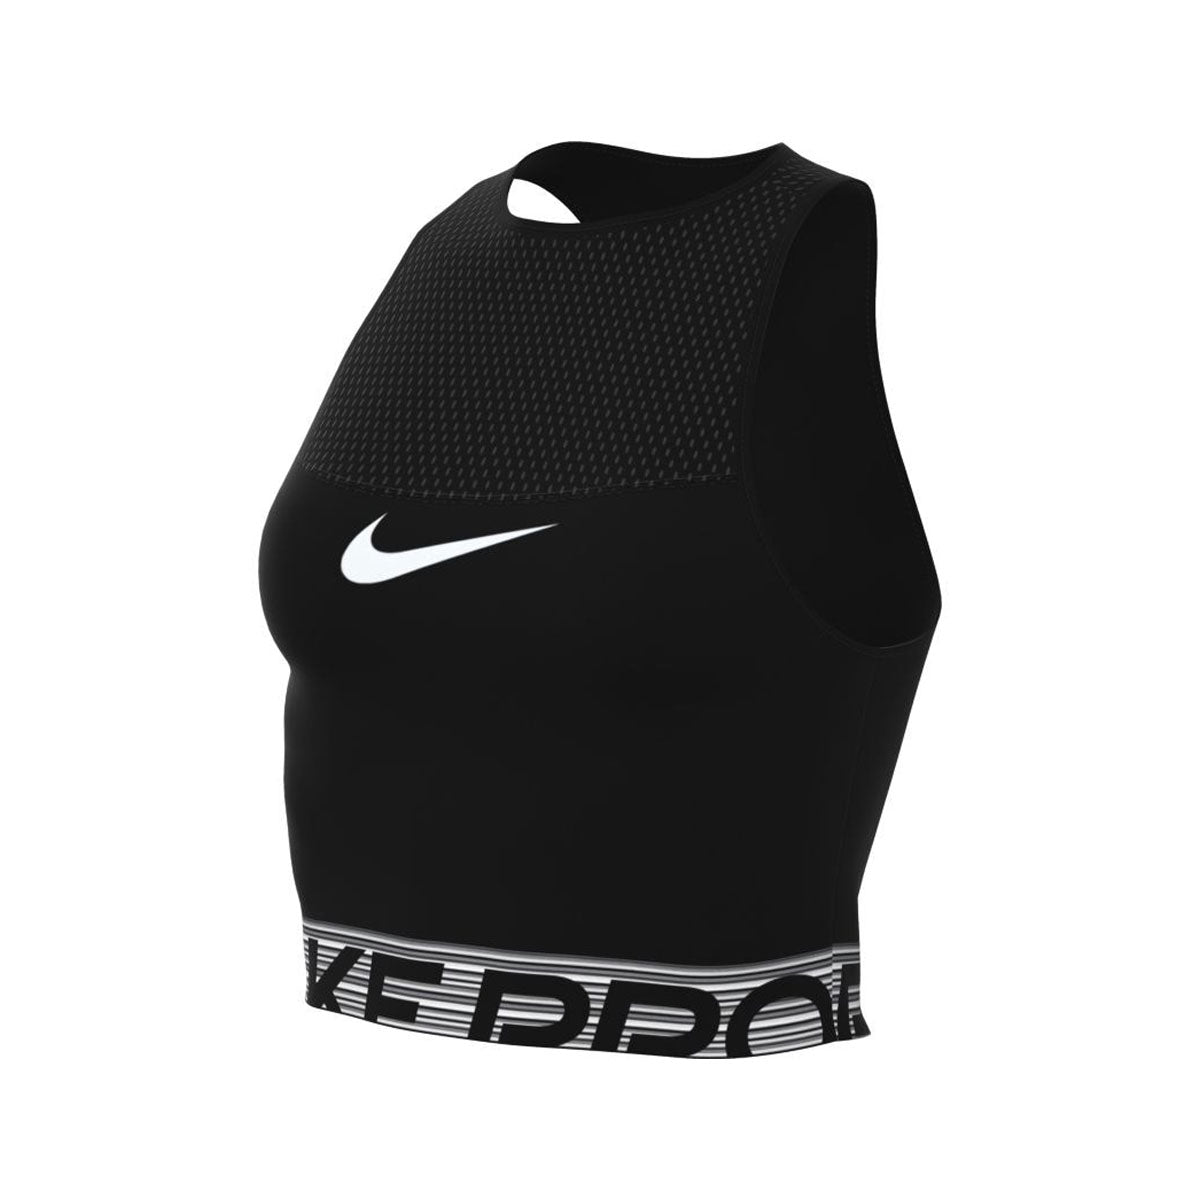 Nike Women's Pro Dri-FIT Graphic Cropped Top